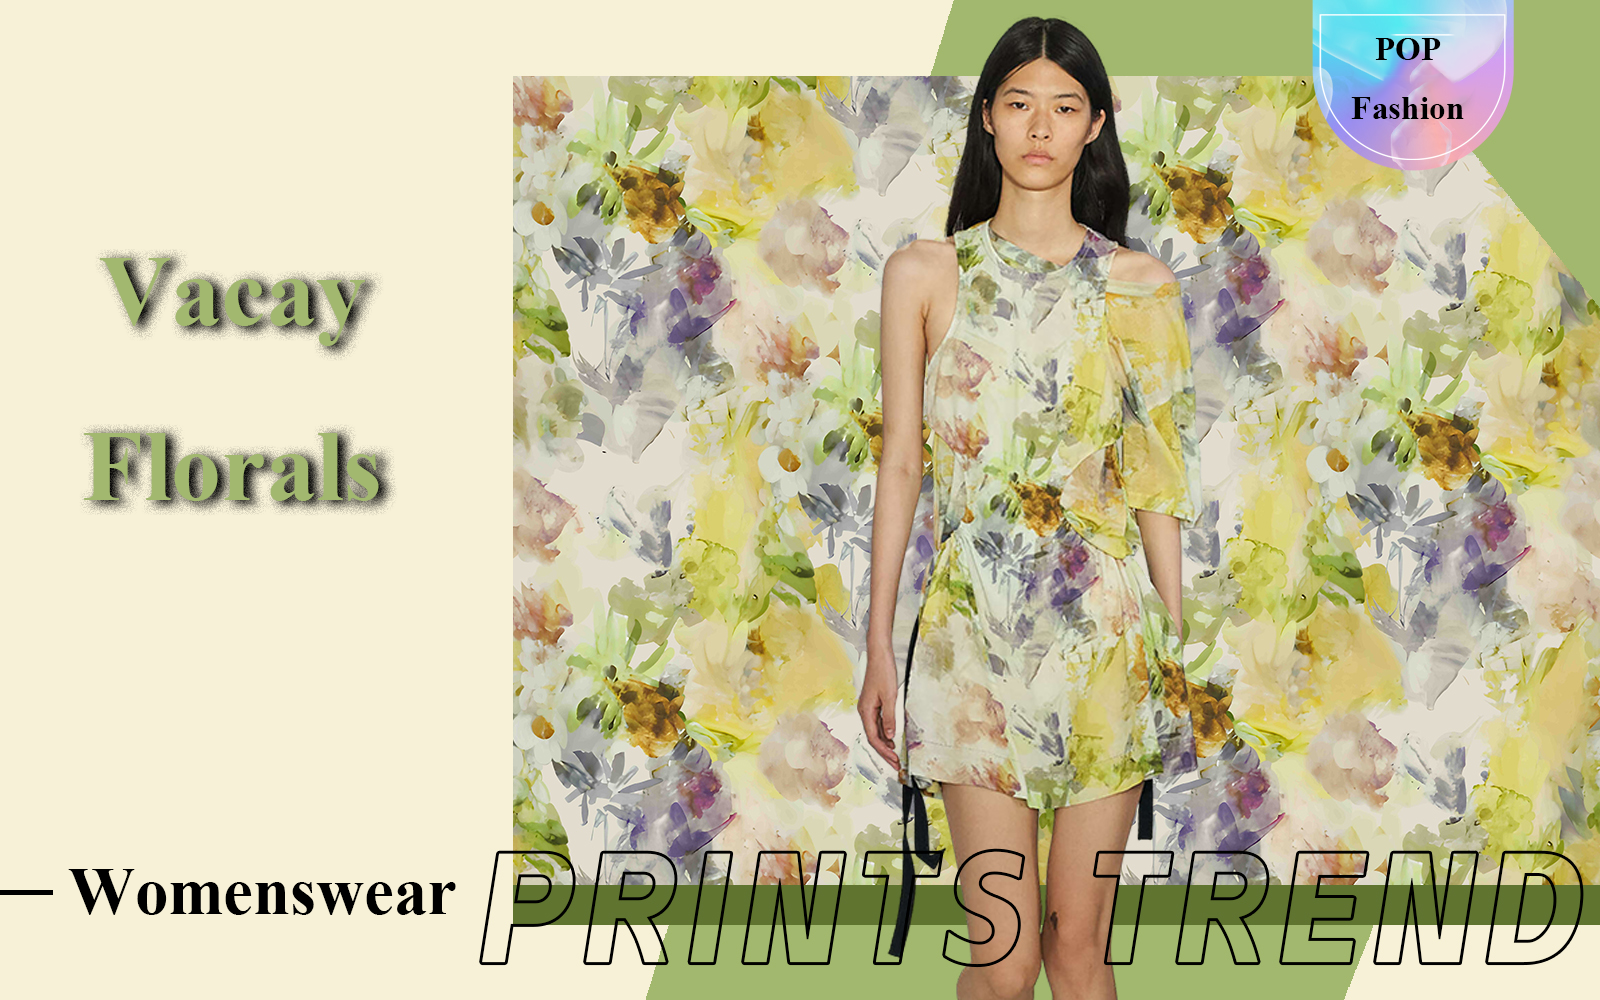 Vacay Florals -- The Pattern Trend for Womenswear